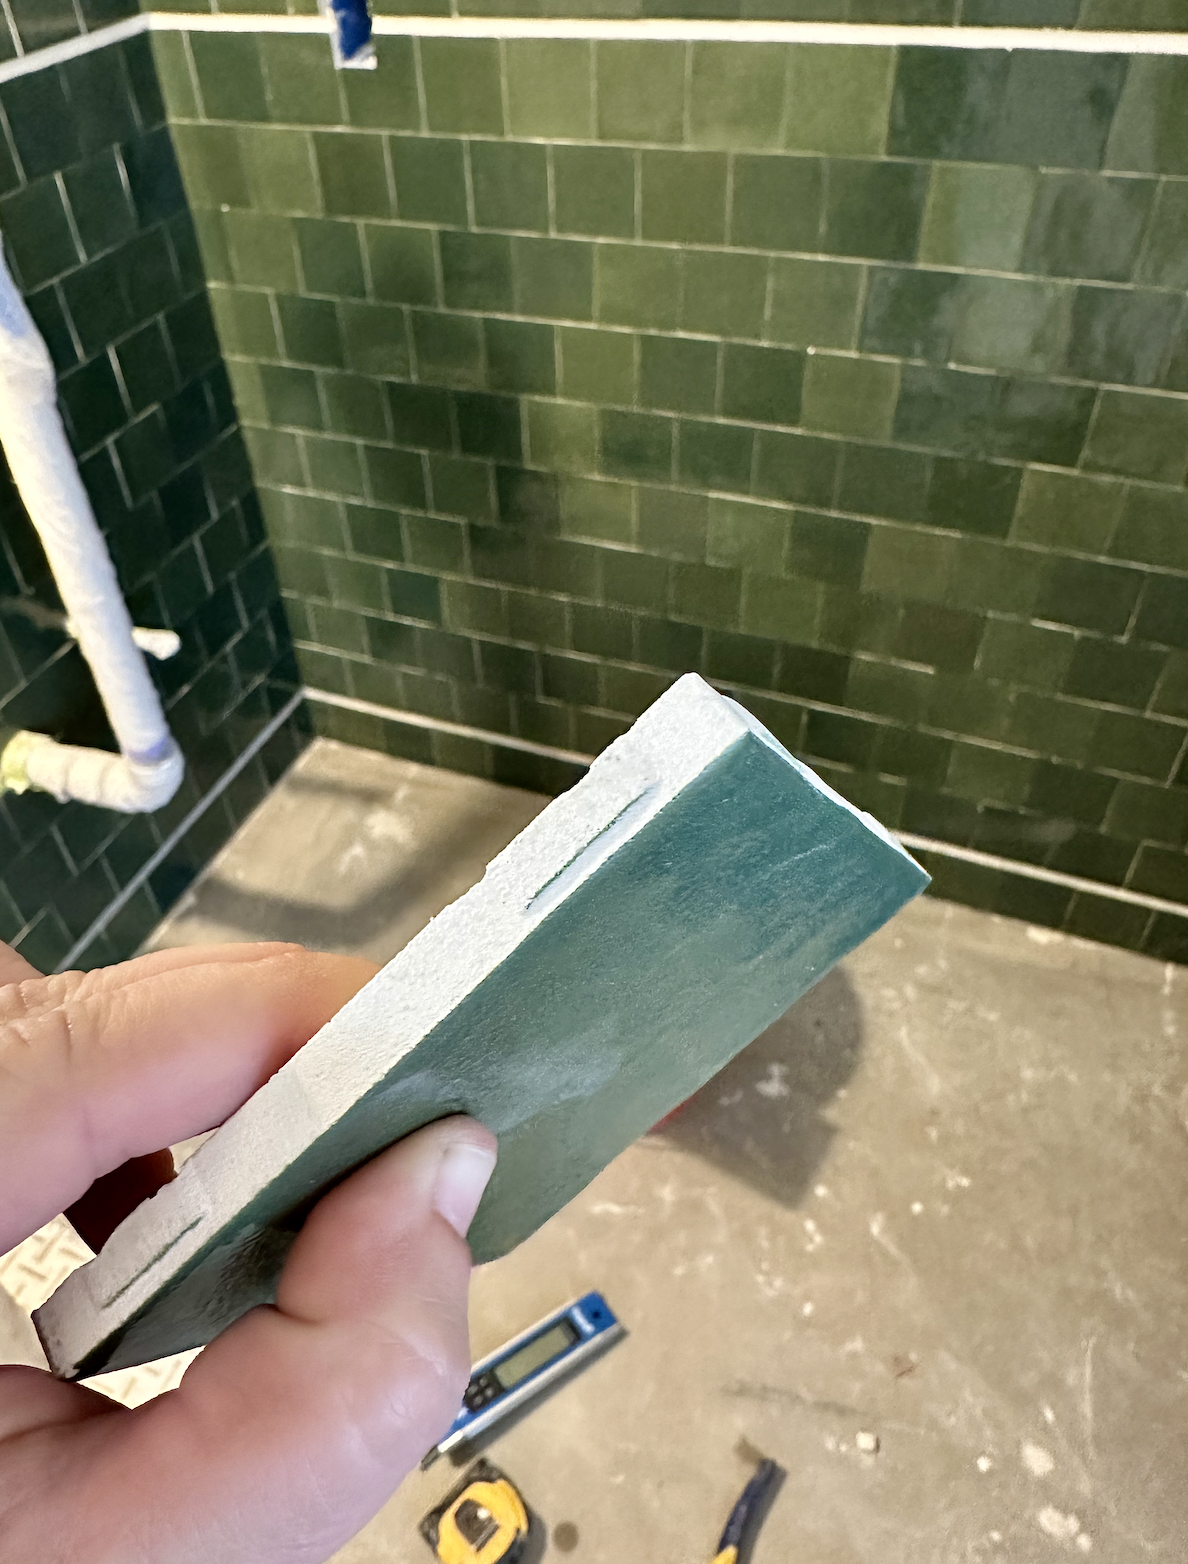 See How a Grout Cleaning Saved This Ceramic Tile Shower in Houston TX from  Severe Water Damage